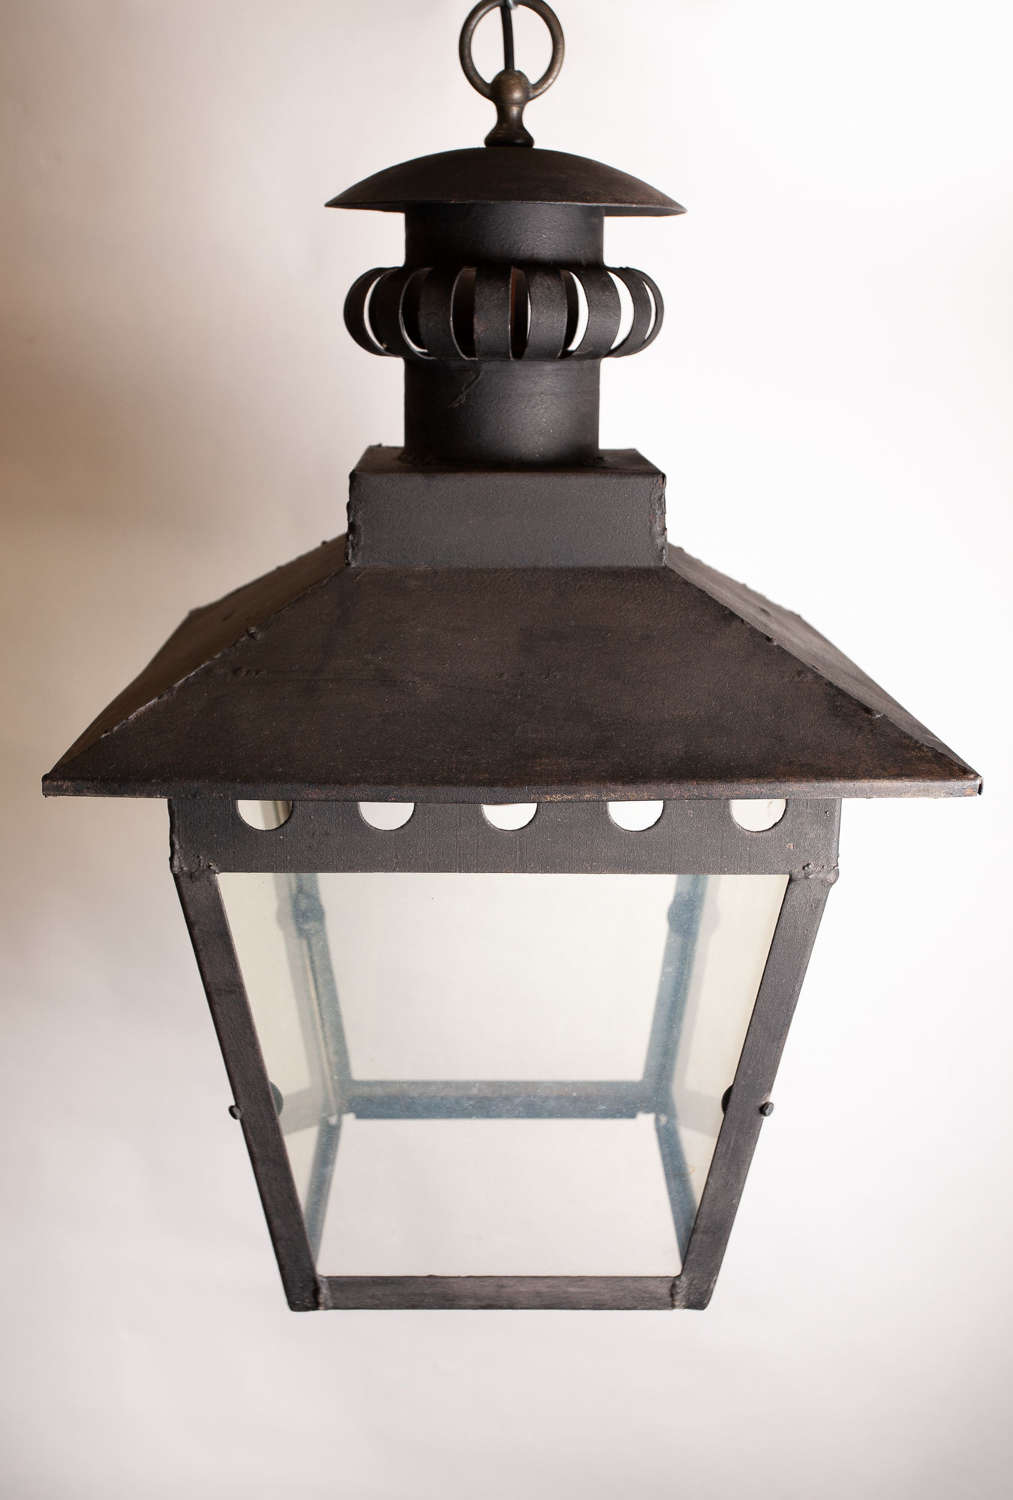 C1920 A French Metal Lantern - 3 available